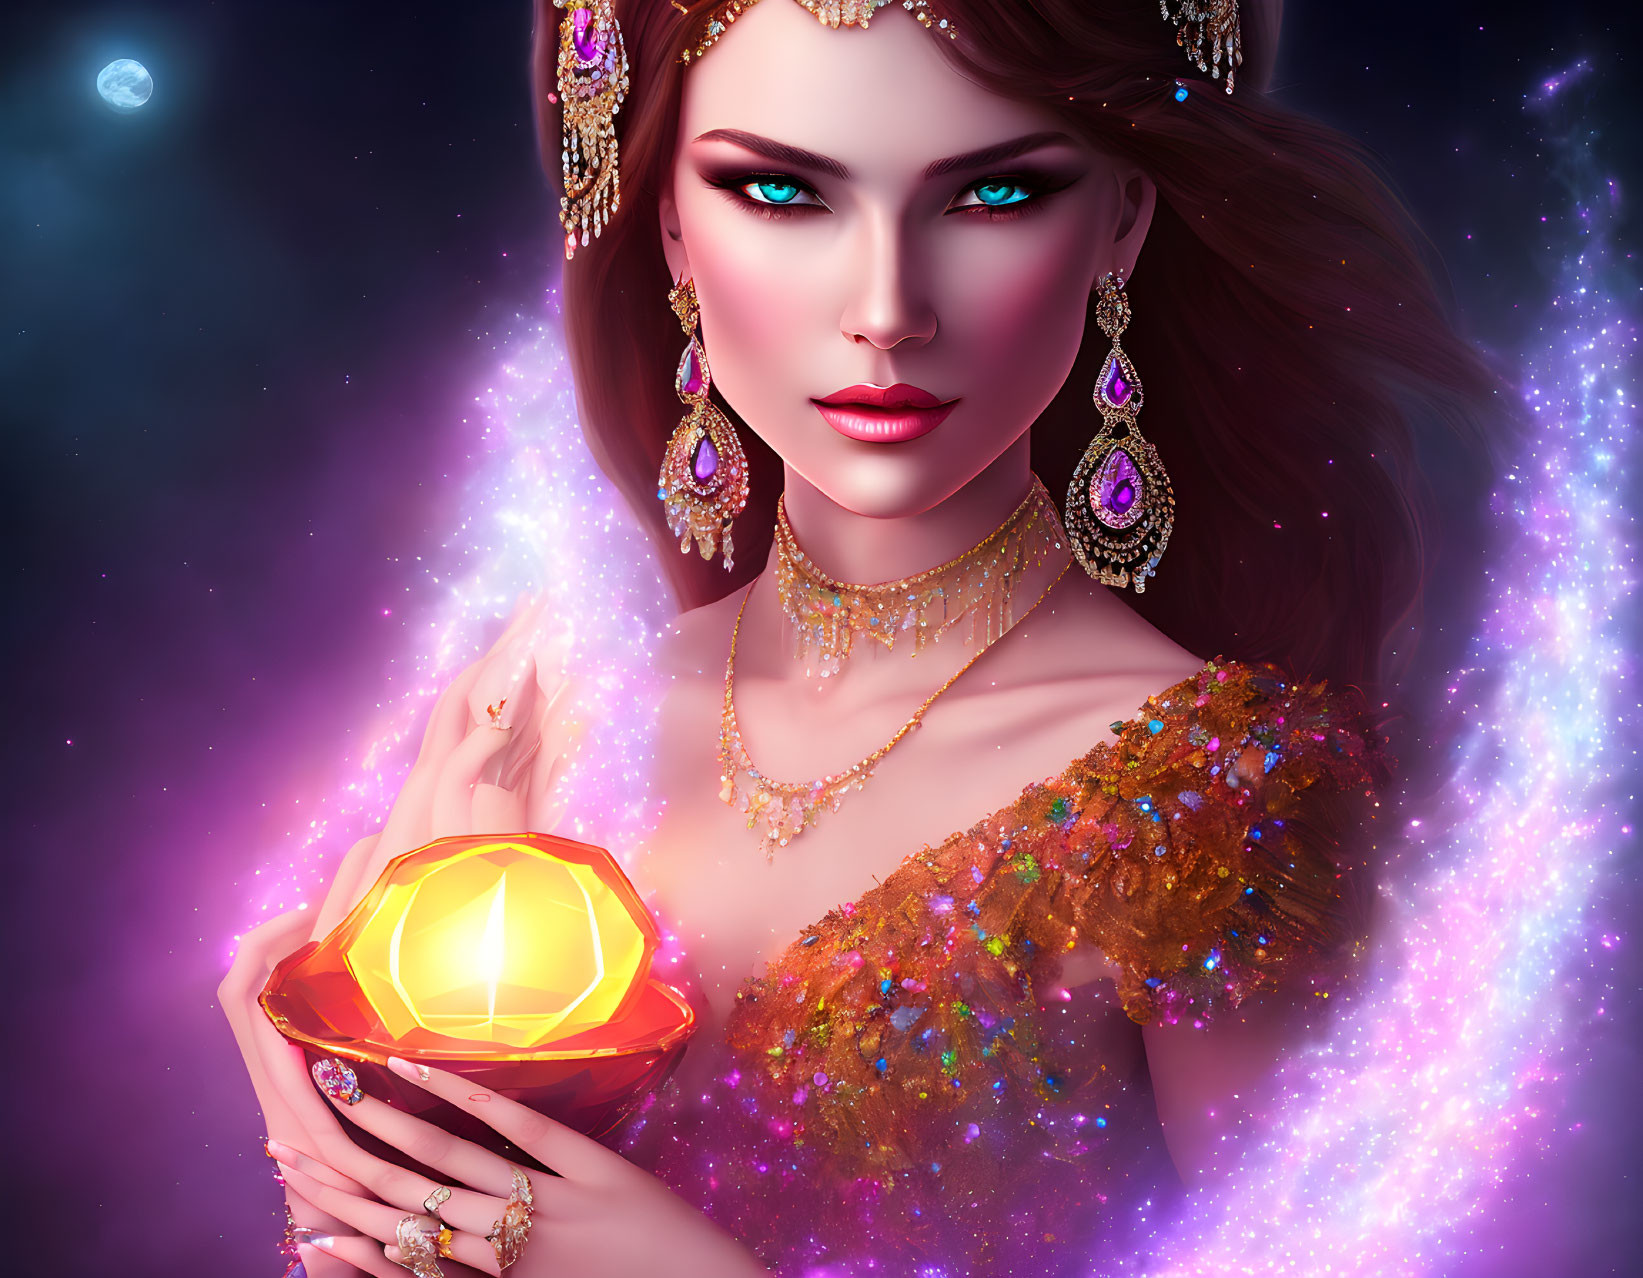 Vibrant makeup and jewelry on woman with gem in cosmic setting